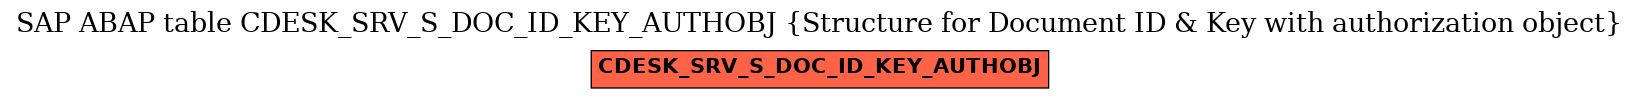 E-R Diagram for table CDESK_SRV_S_DOC_ID_KEY_AUTHOBJ (Structure for Document ID & Key with authorization object)